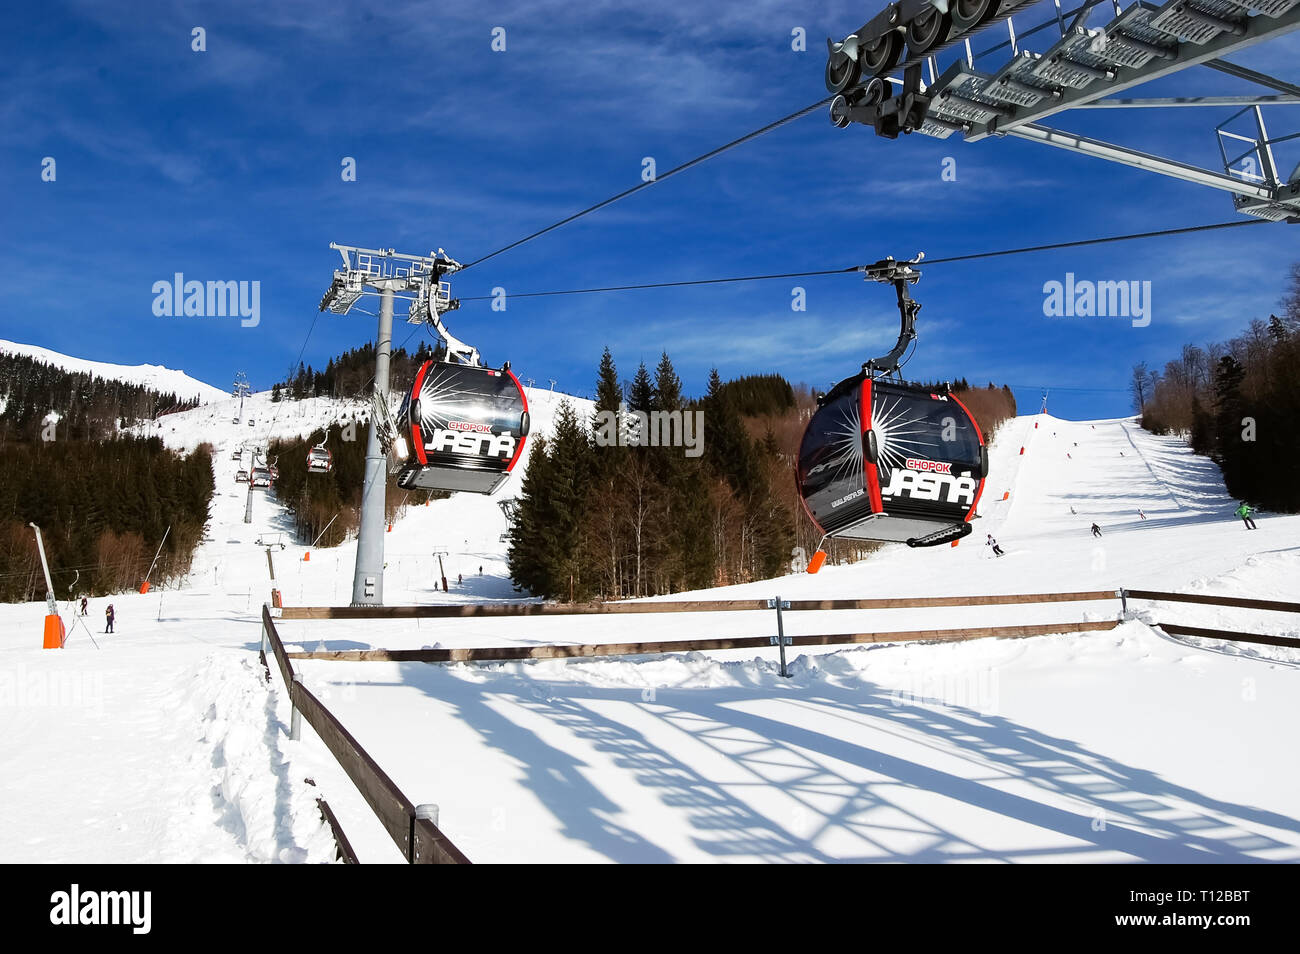 Jasna, Slovakia - January 22, 2019: Cabins of the cableway at the station and view of the ski slopes from the south side of Chopok mountain on a sunny Stock Photo